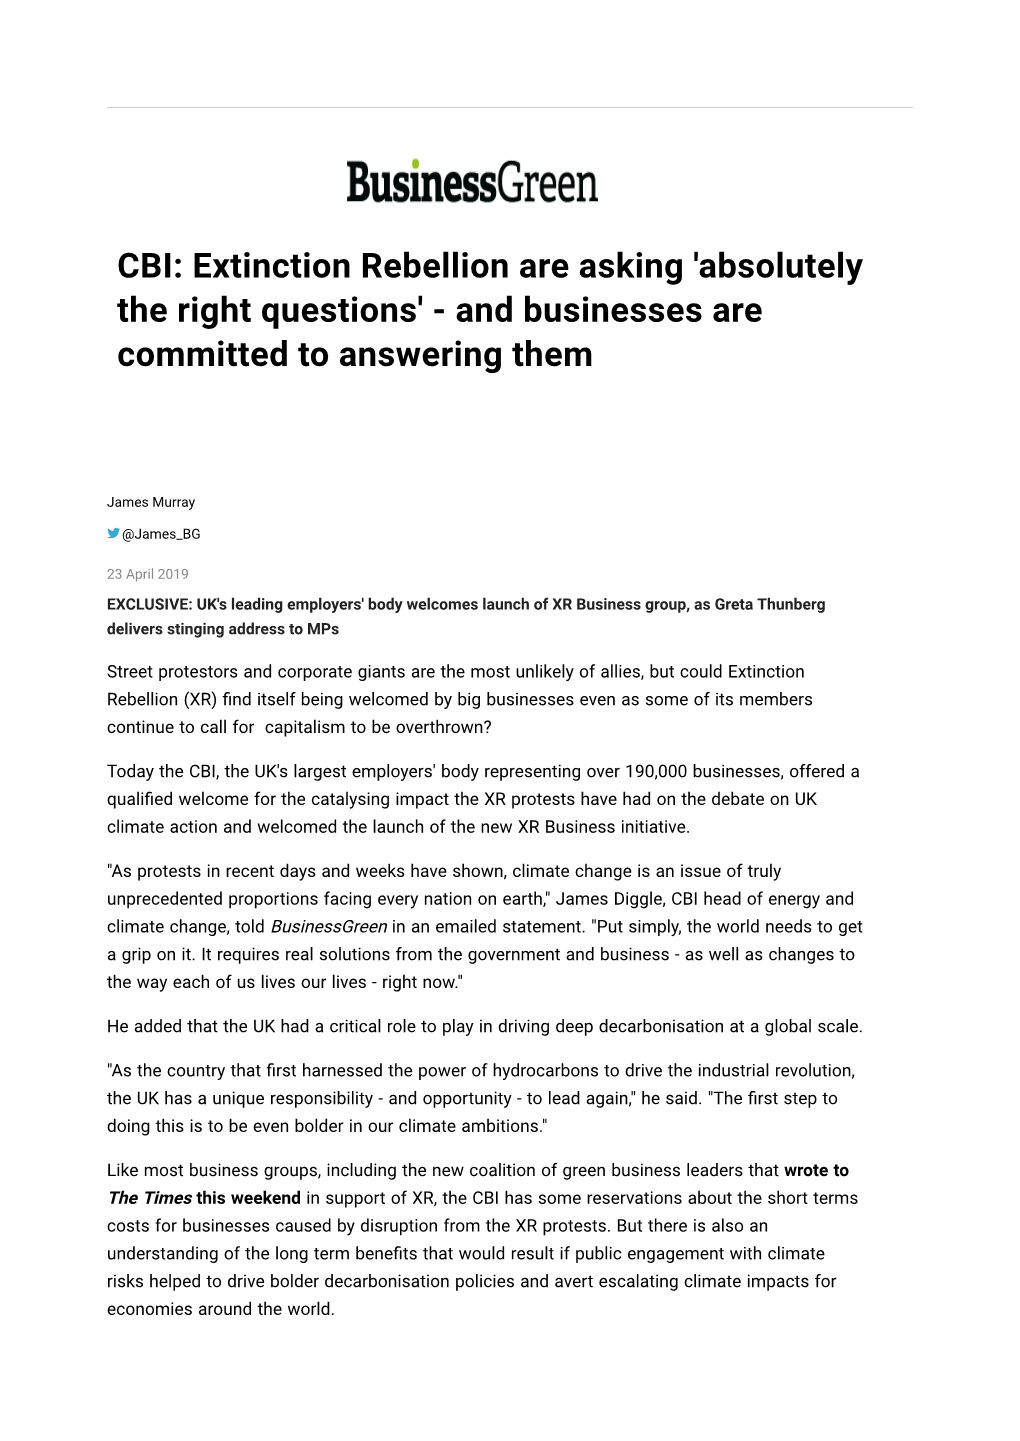 CBI: Extinction Rebellion Are Asking 'Absolutely the Right Questions' - and Businesses Are Committed to Answering Them